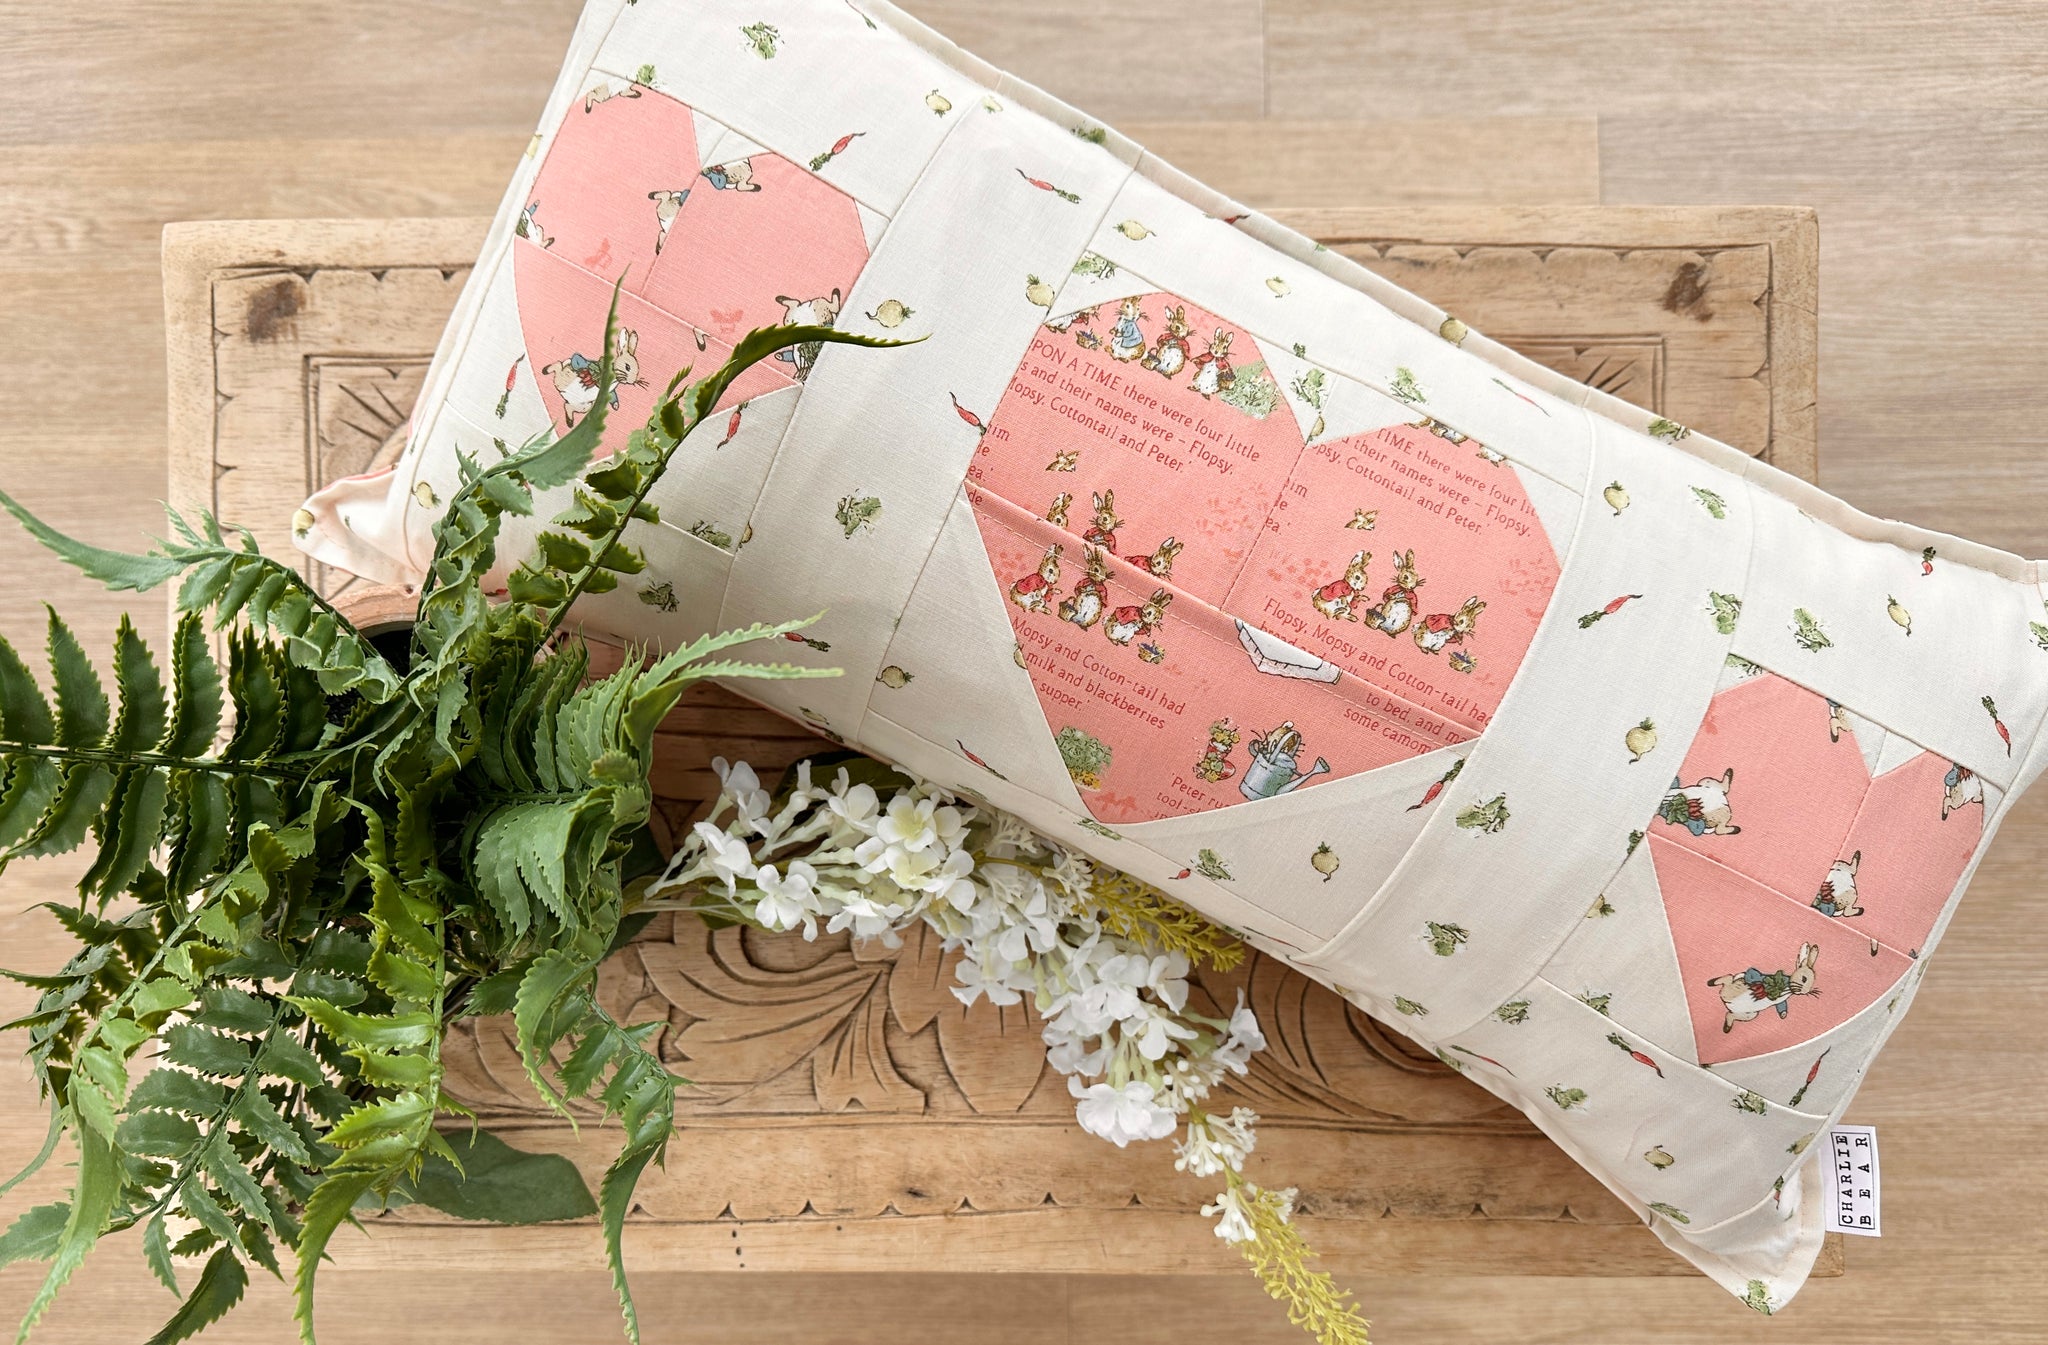 Make Your Own Sweet Secrets Pillow in 20 Simple Steps